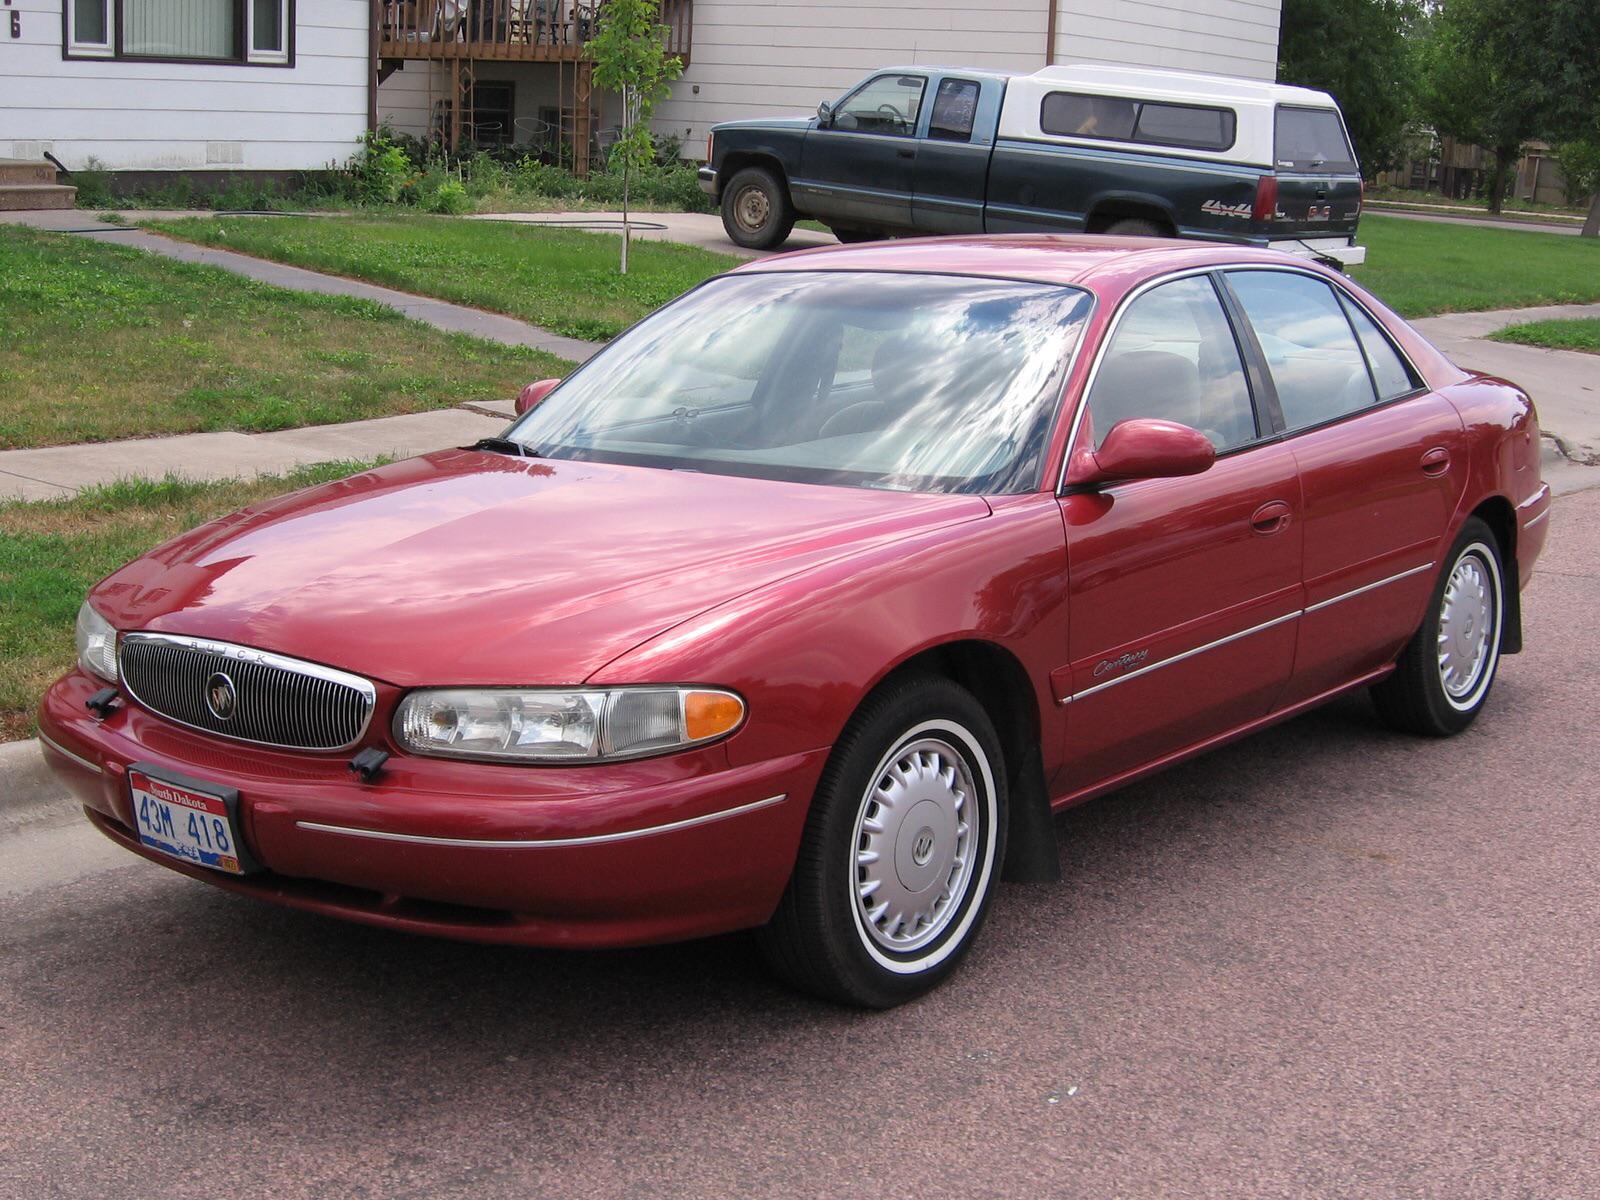 1998 Buick Century, representing podunk towns all across America. Usually  found covered in gravel dust and driven by elderly farmers :  r/regularcarreviews